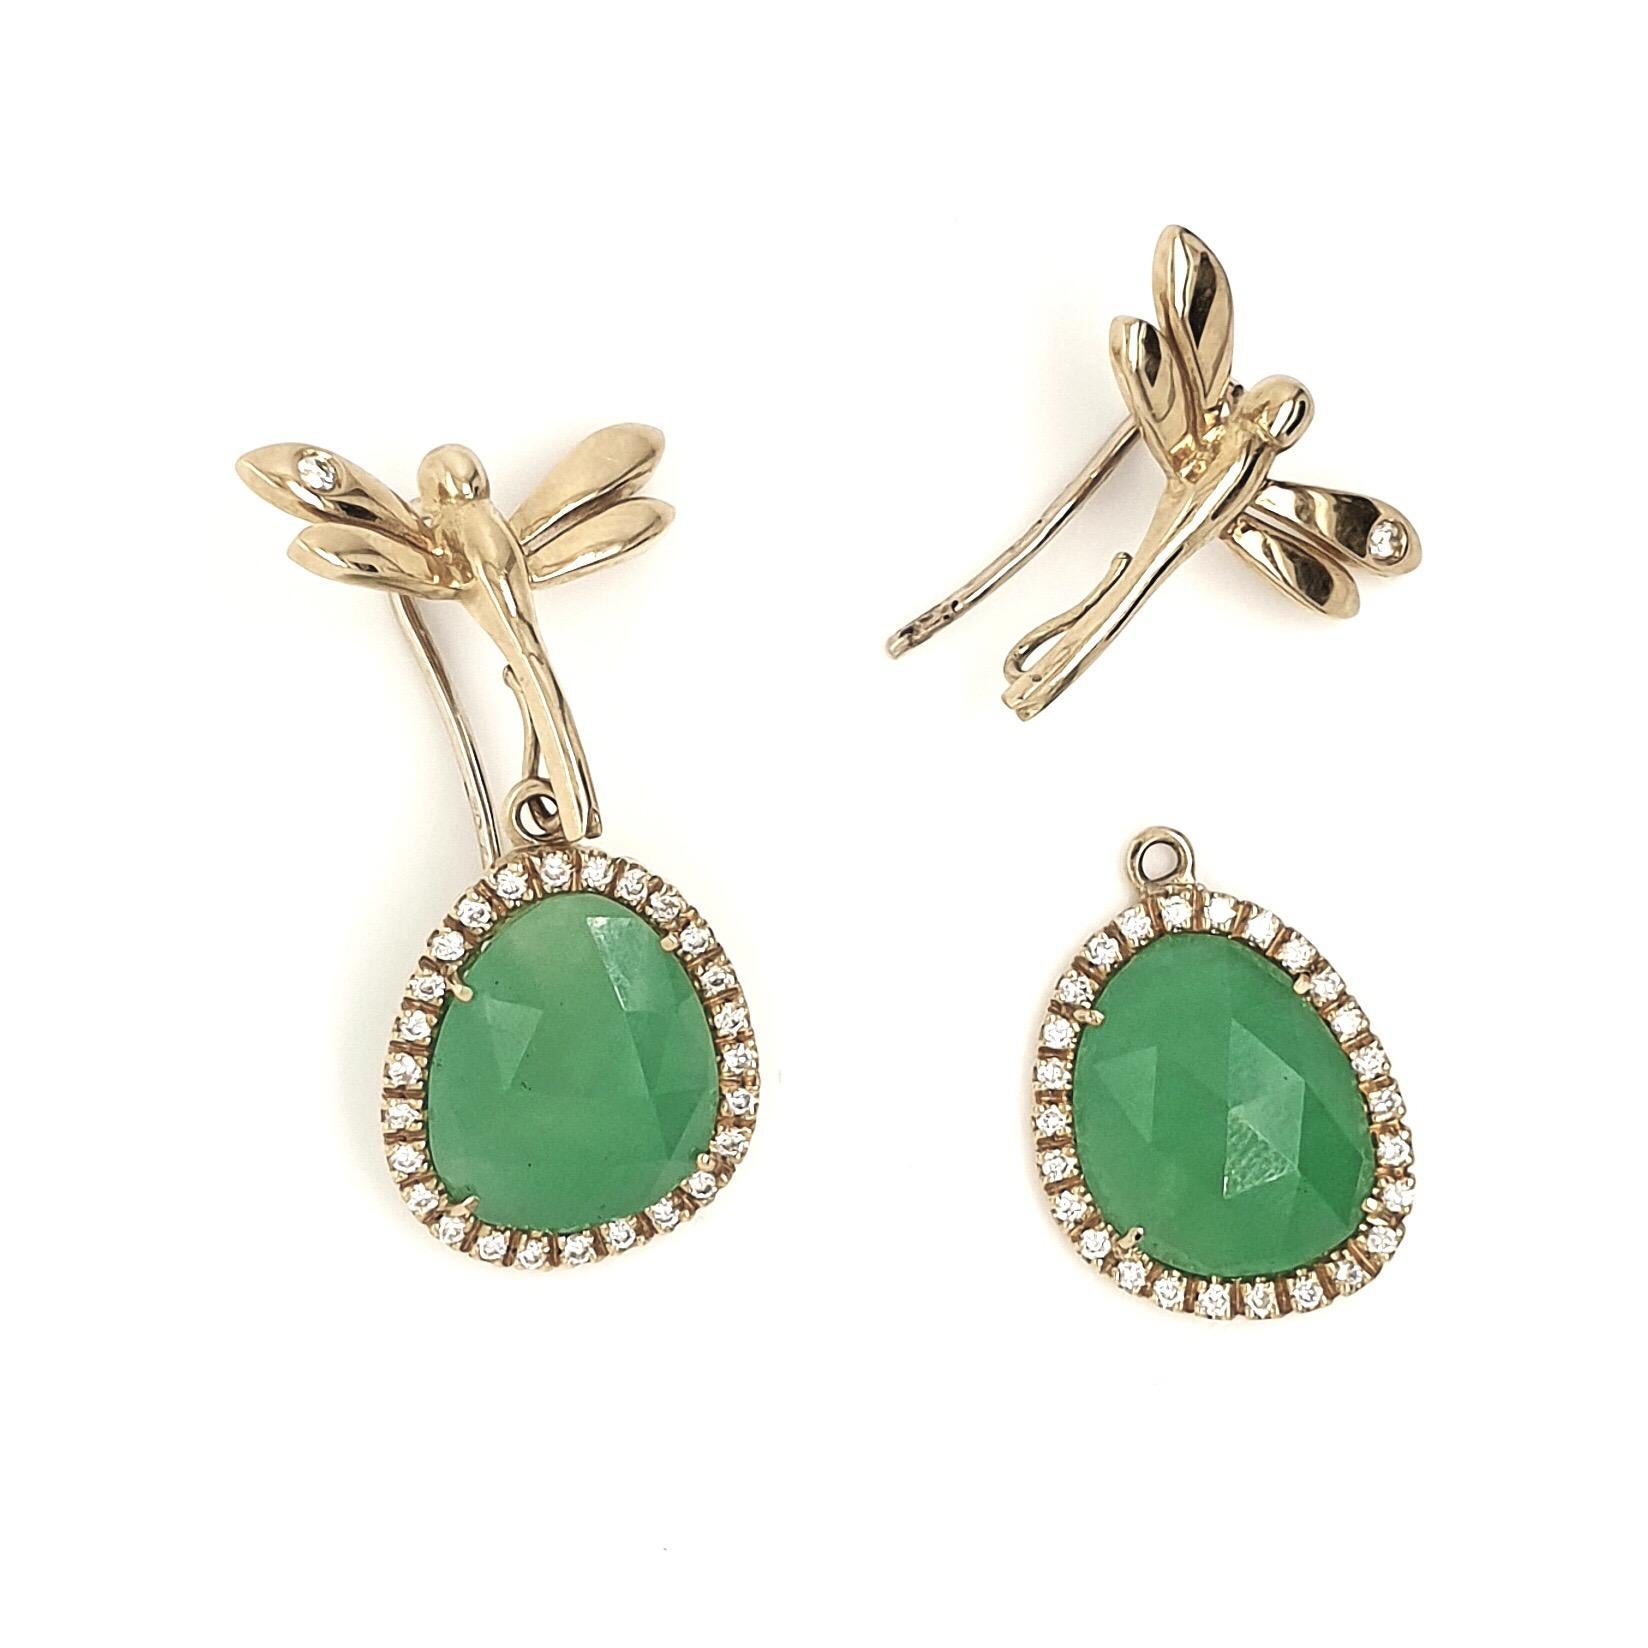 A pretty set of earrings masterfully created entirely by hand. An 18-karat yellow gold dragonfly with a single round-cut diamond set into its wing sits above a stone of apple-green jade which framed with a single row of white diamonds and set in